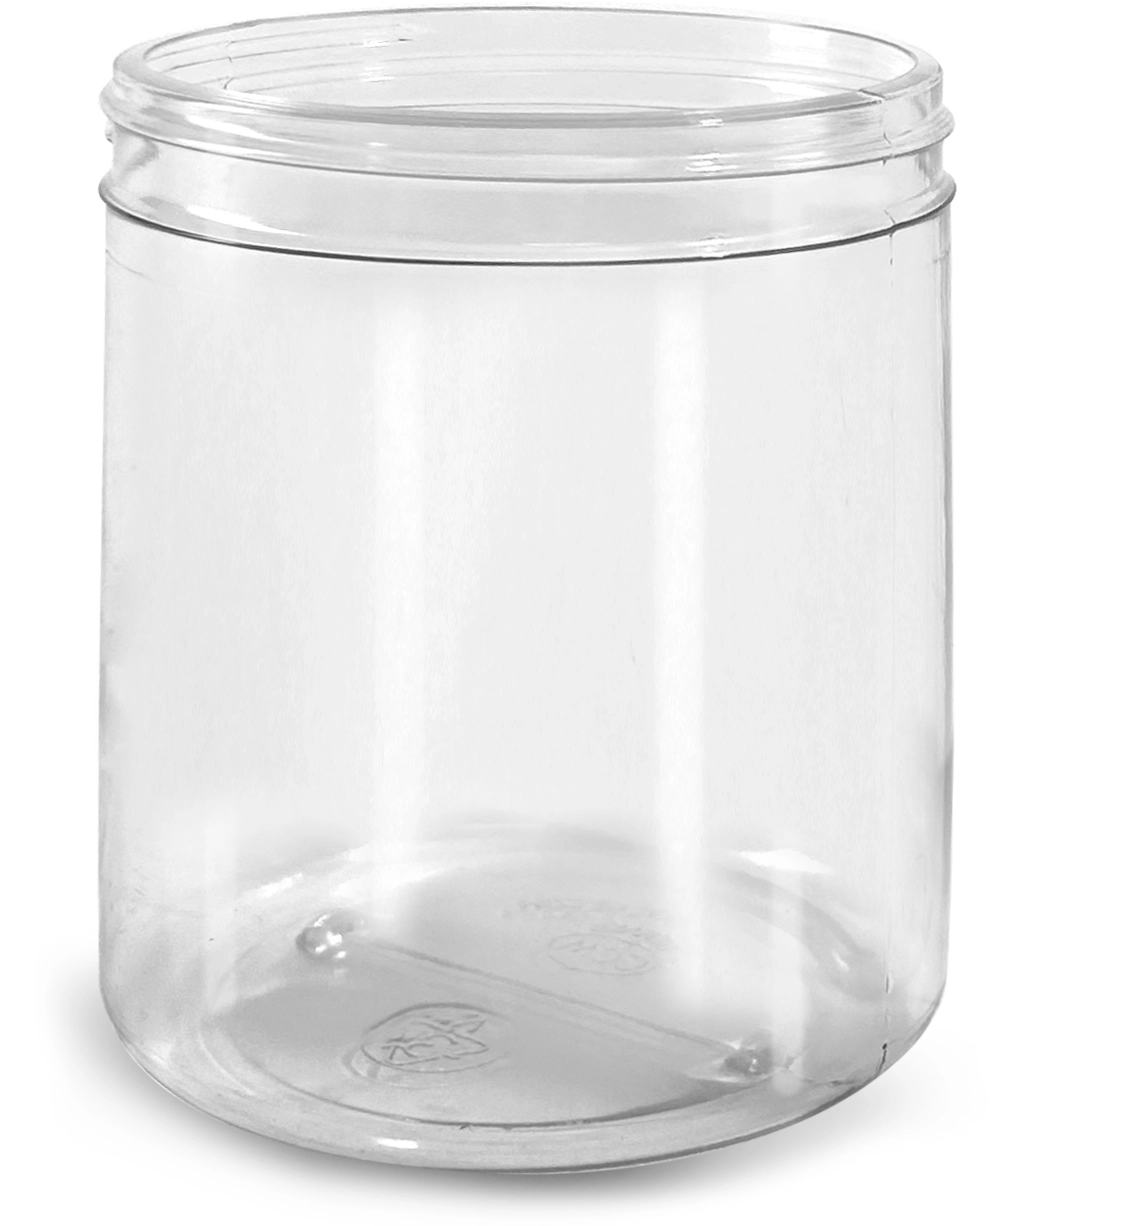 78 oz Round Flair Clear PET Jars (Bulk), Caps Not Included